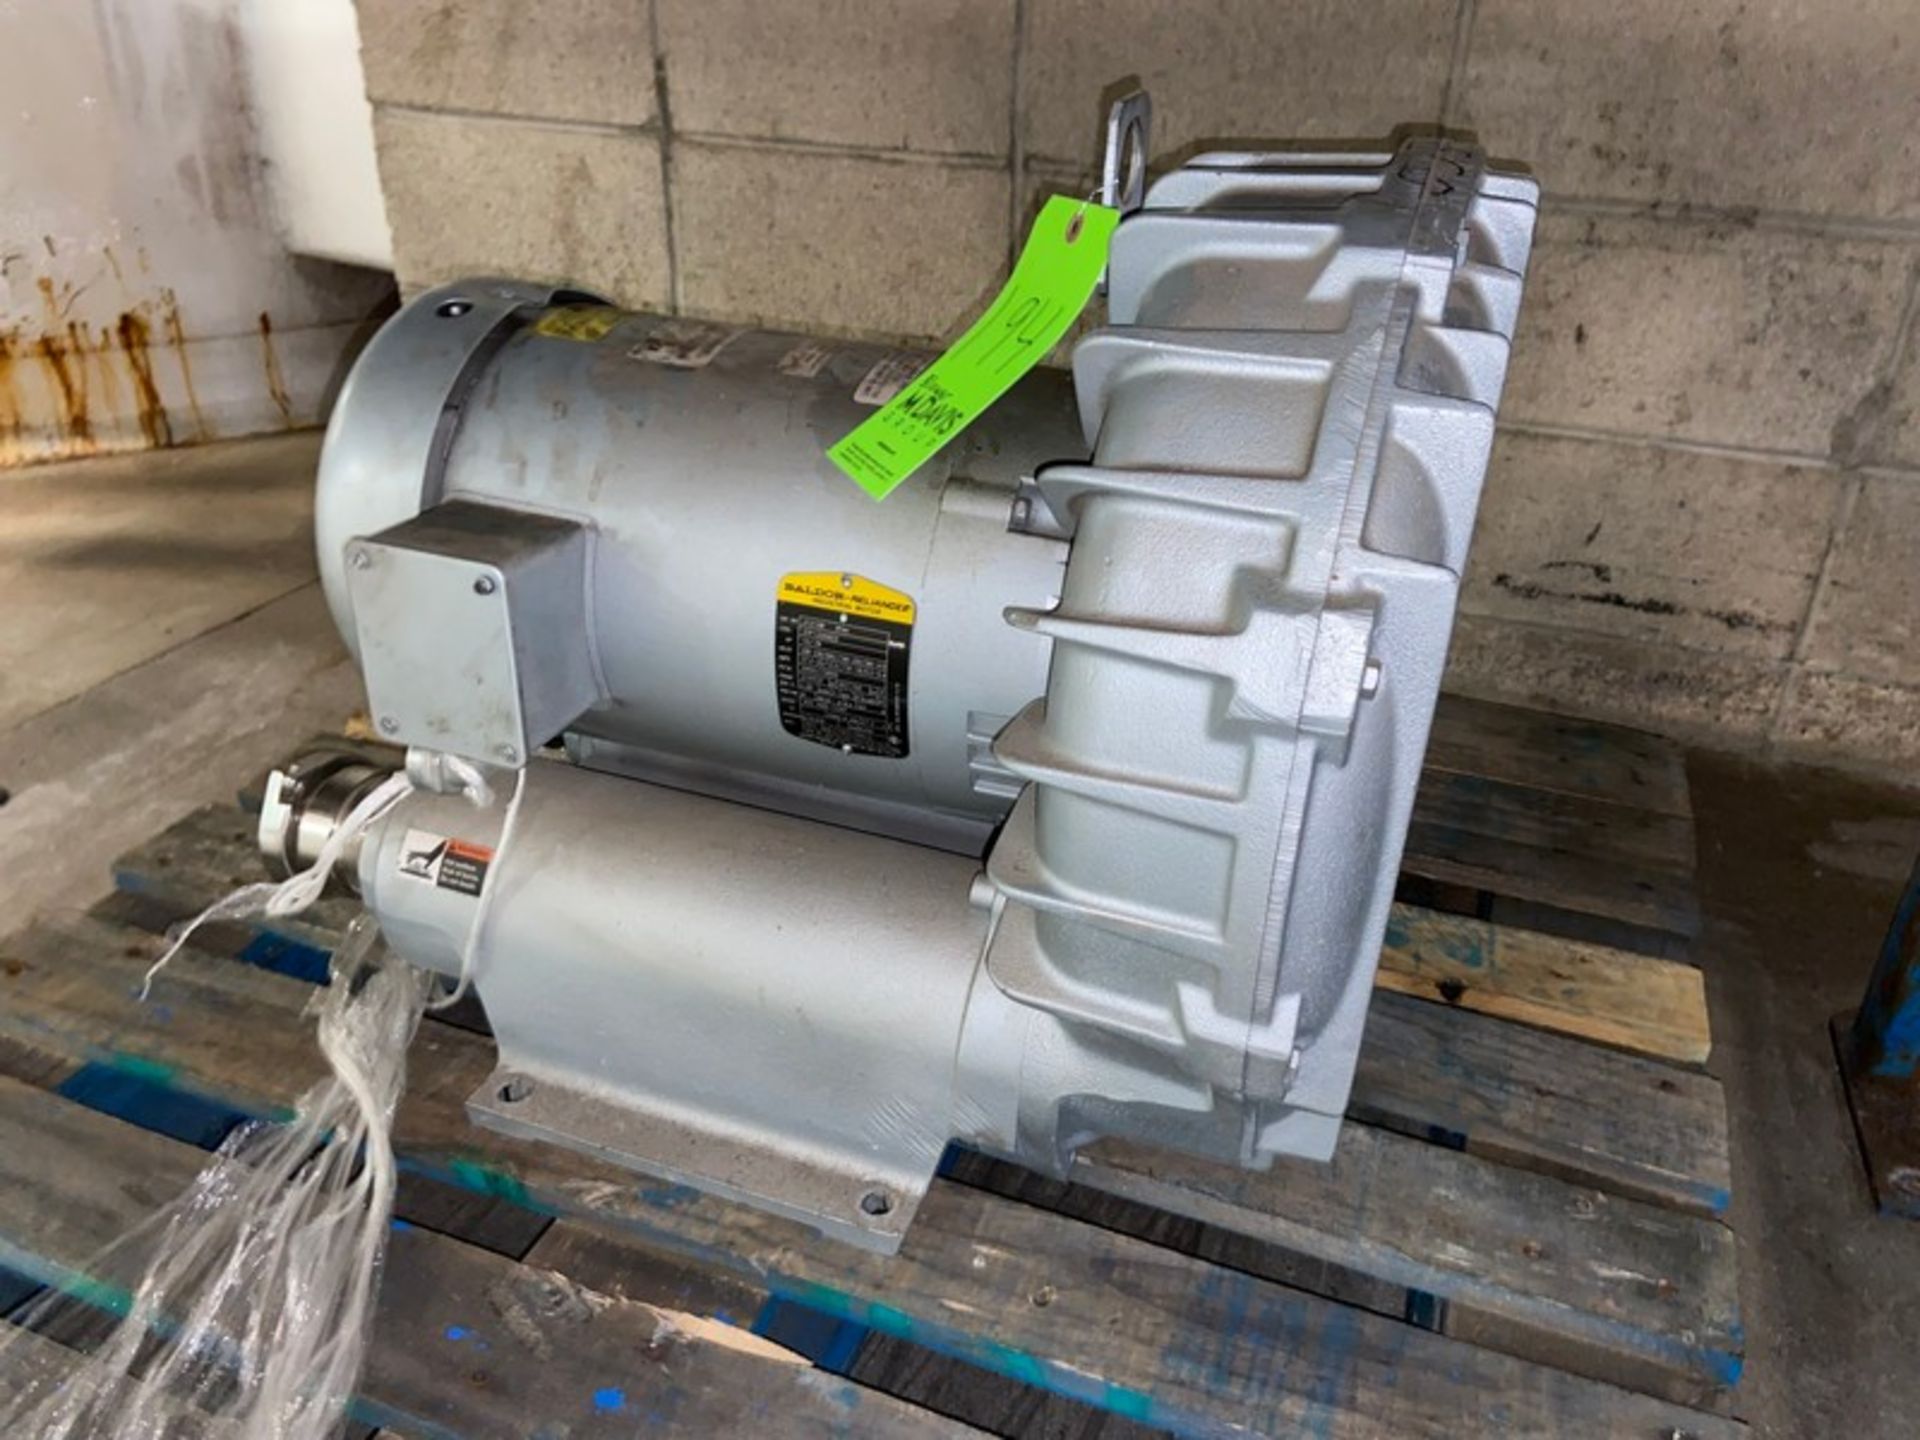 Baldor 10/8 Blower, 208-230/460 Volts, 3 Phase, 3450/2850 RPM, with Clamp Type Inlet/Outlet (LOCATED